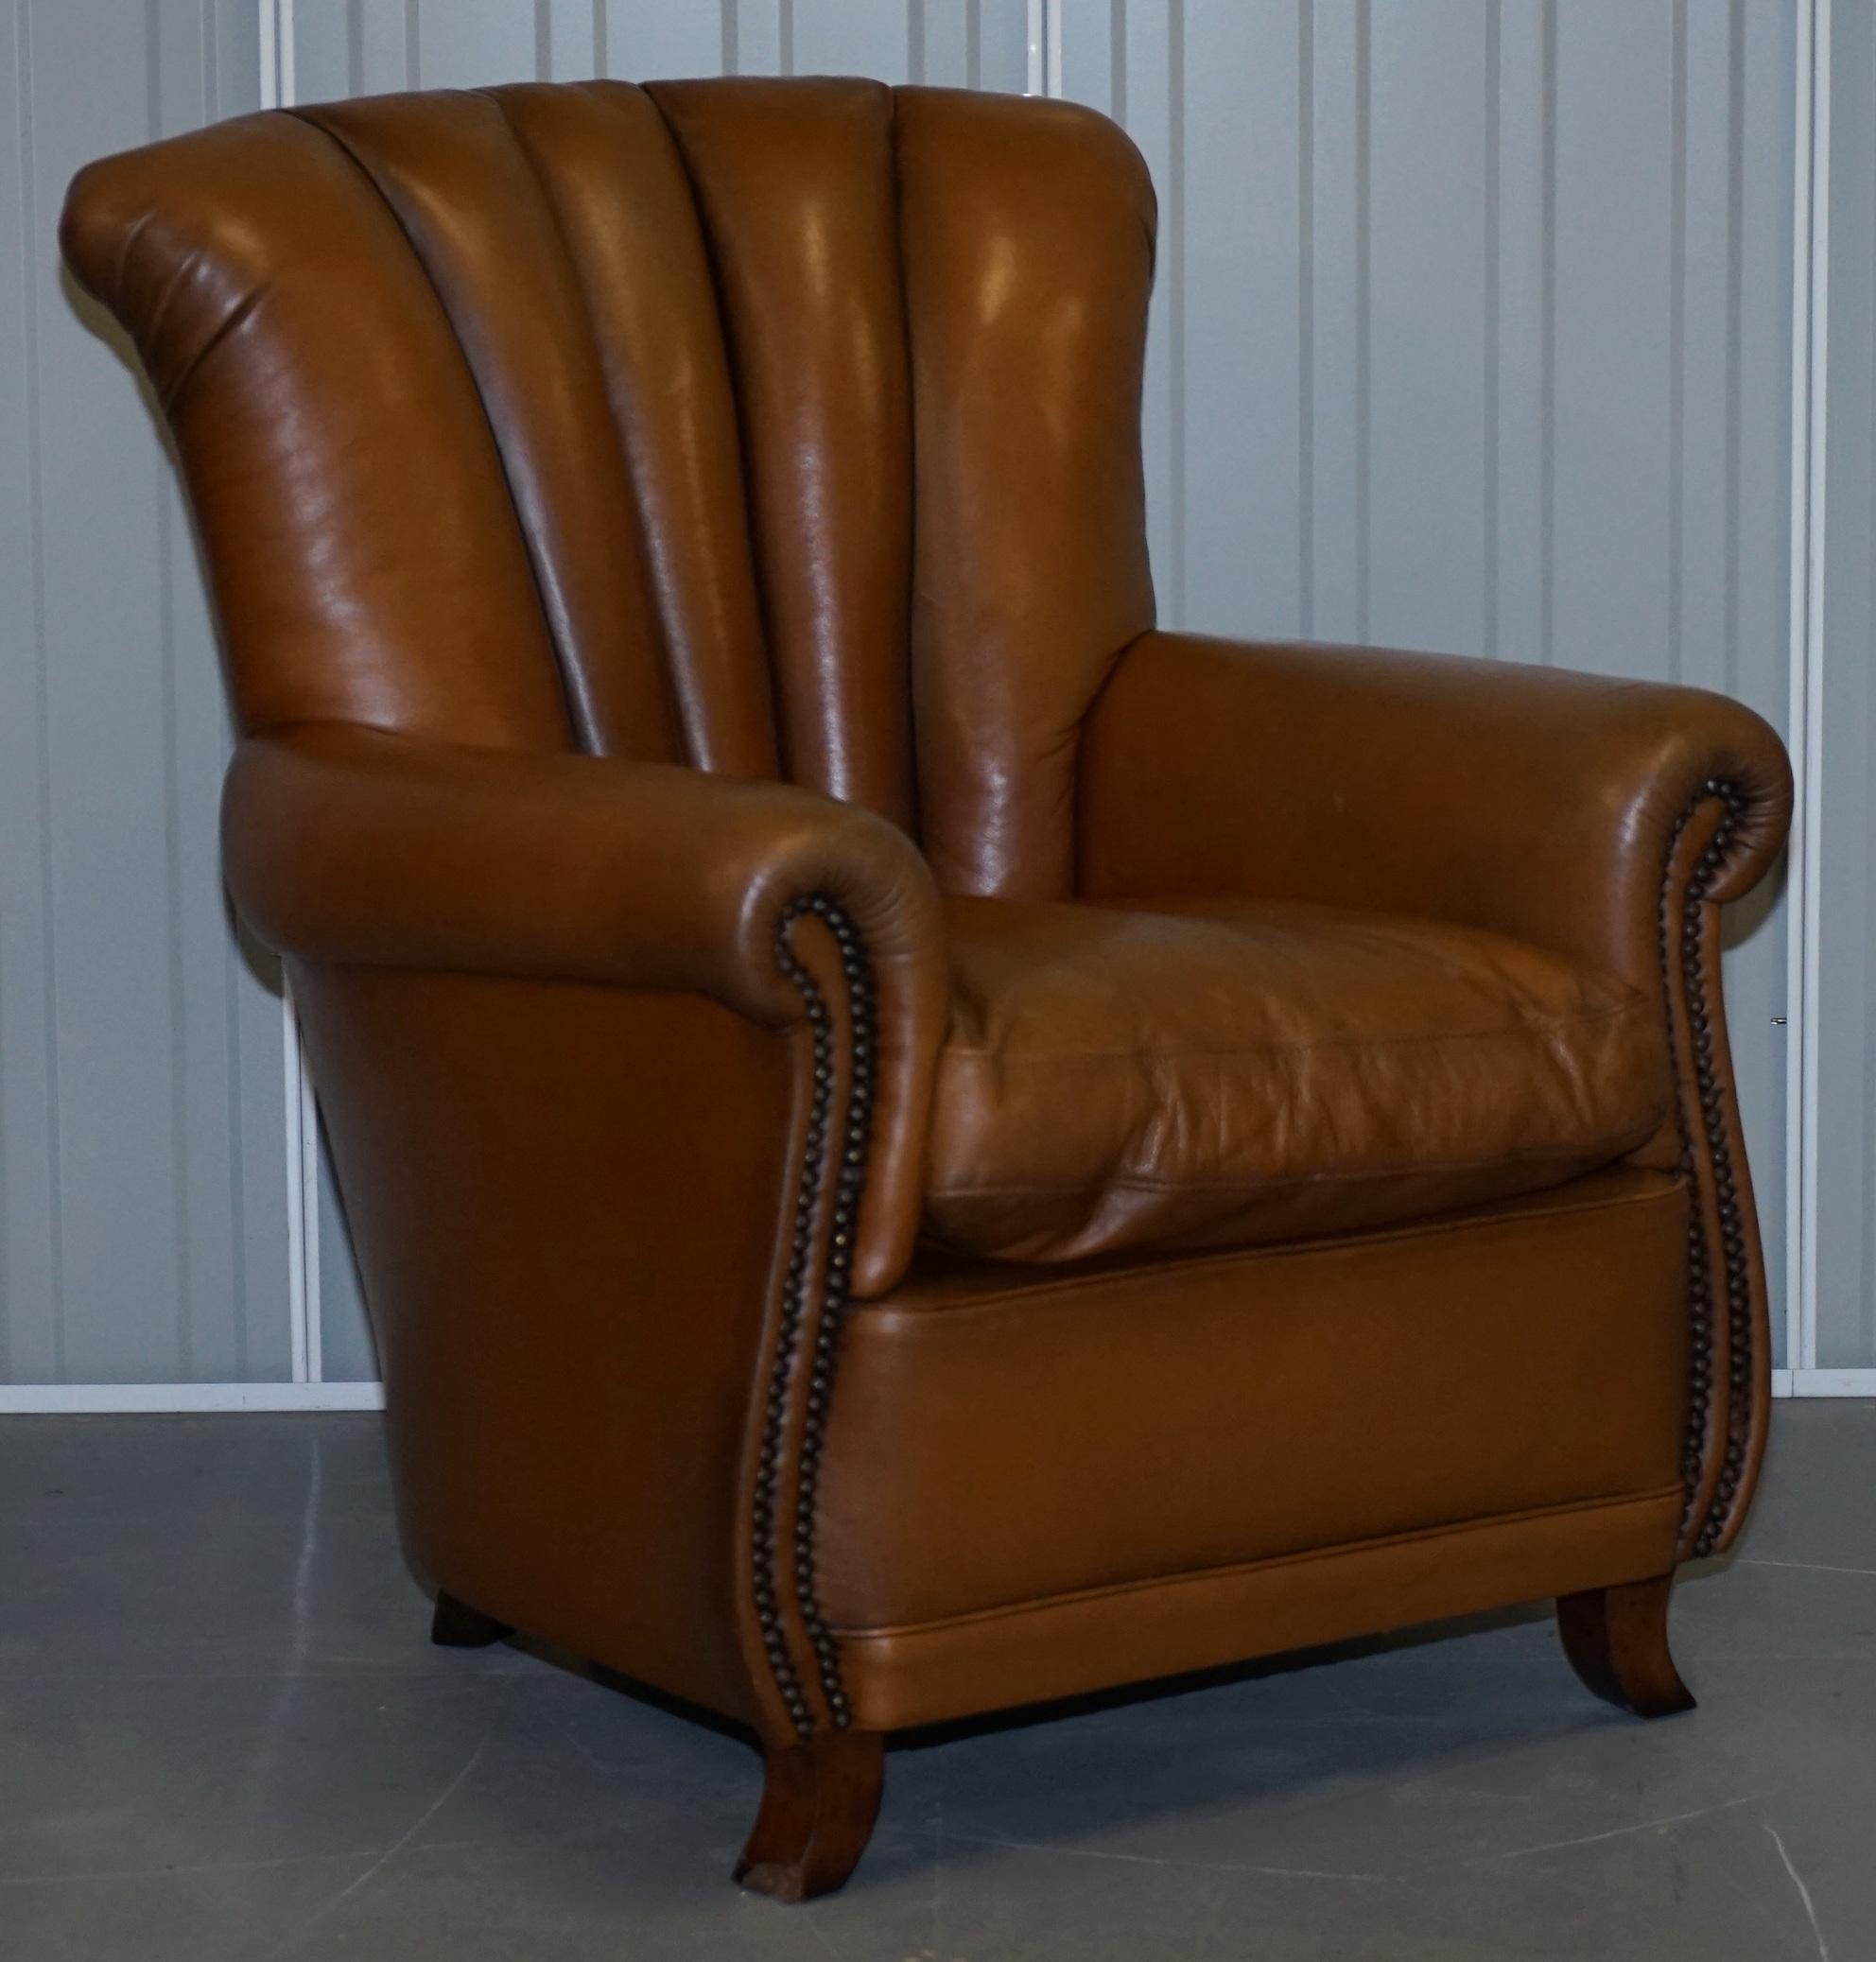 Lovely Pair of Tan Brown Leather Tetra Ella Armchairs with Art Deco Fluted Backs 5